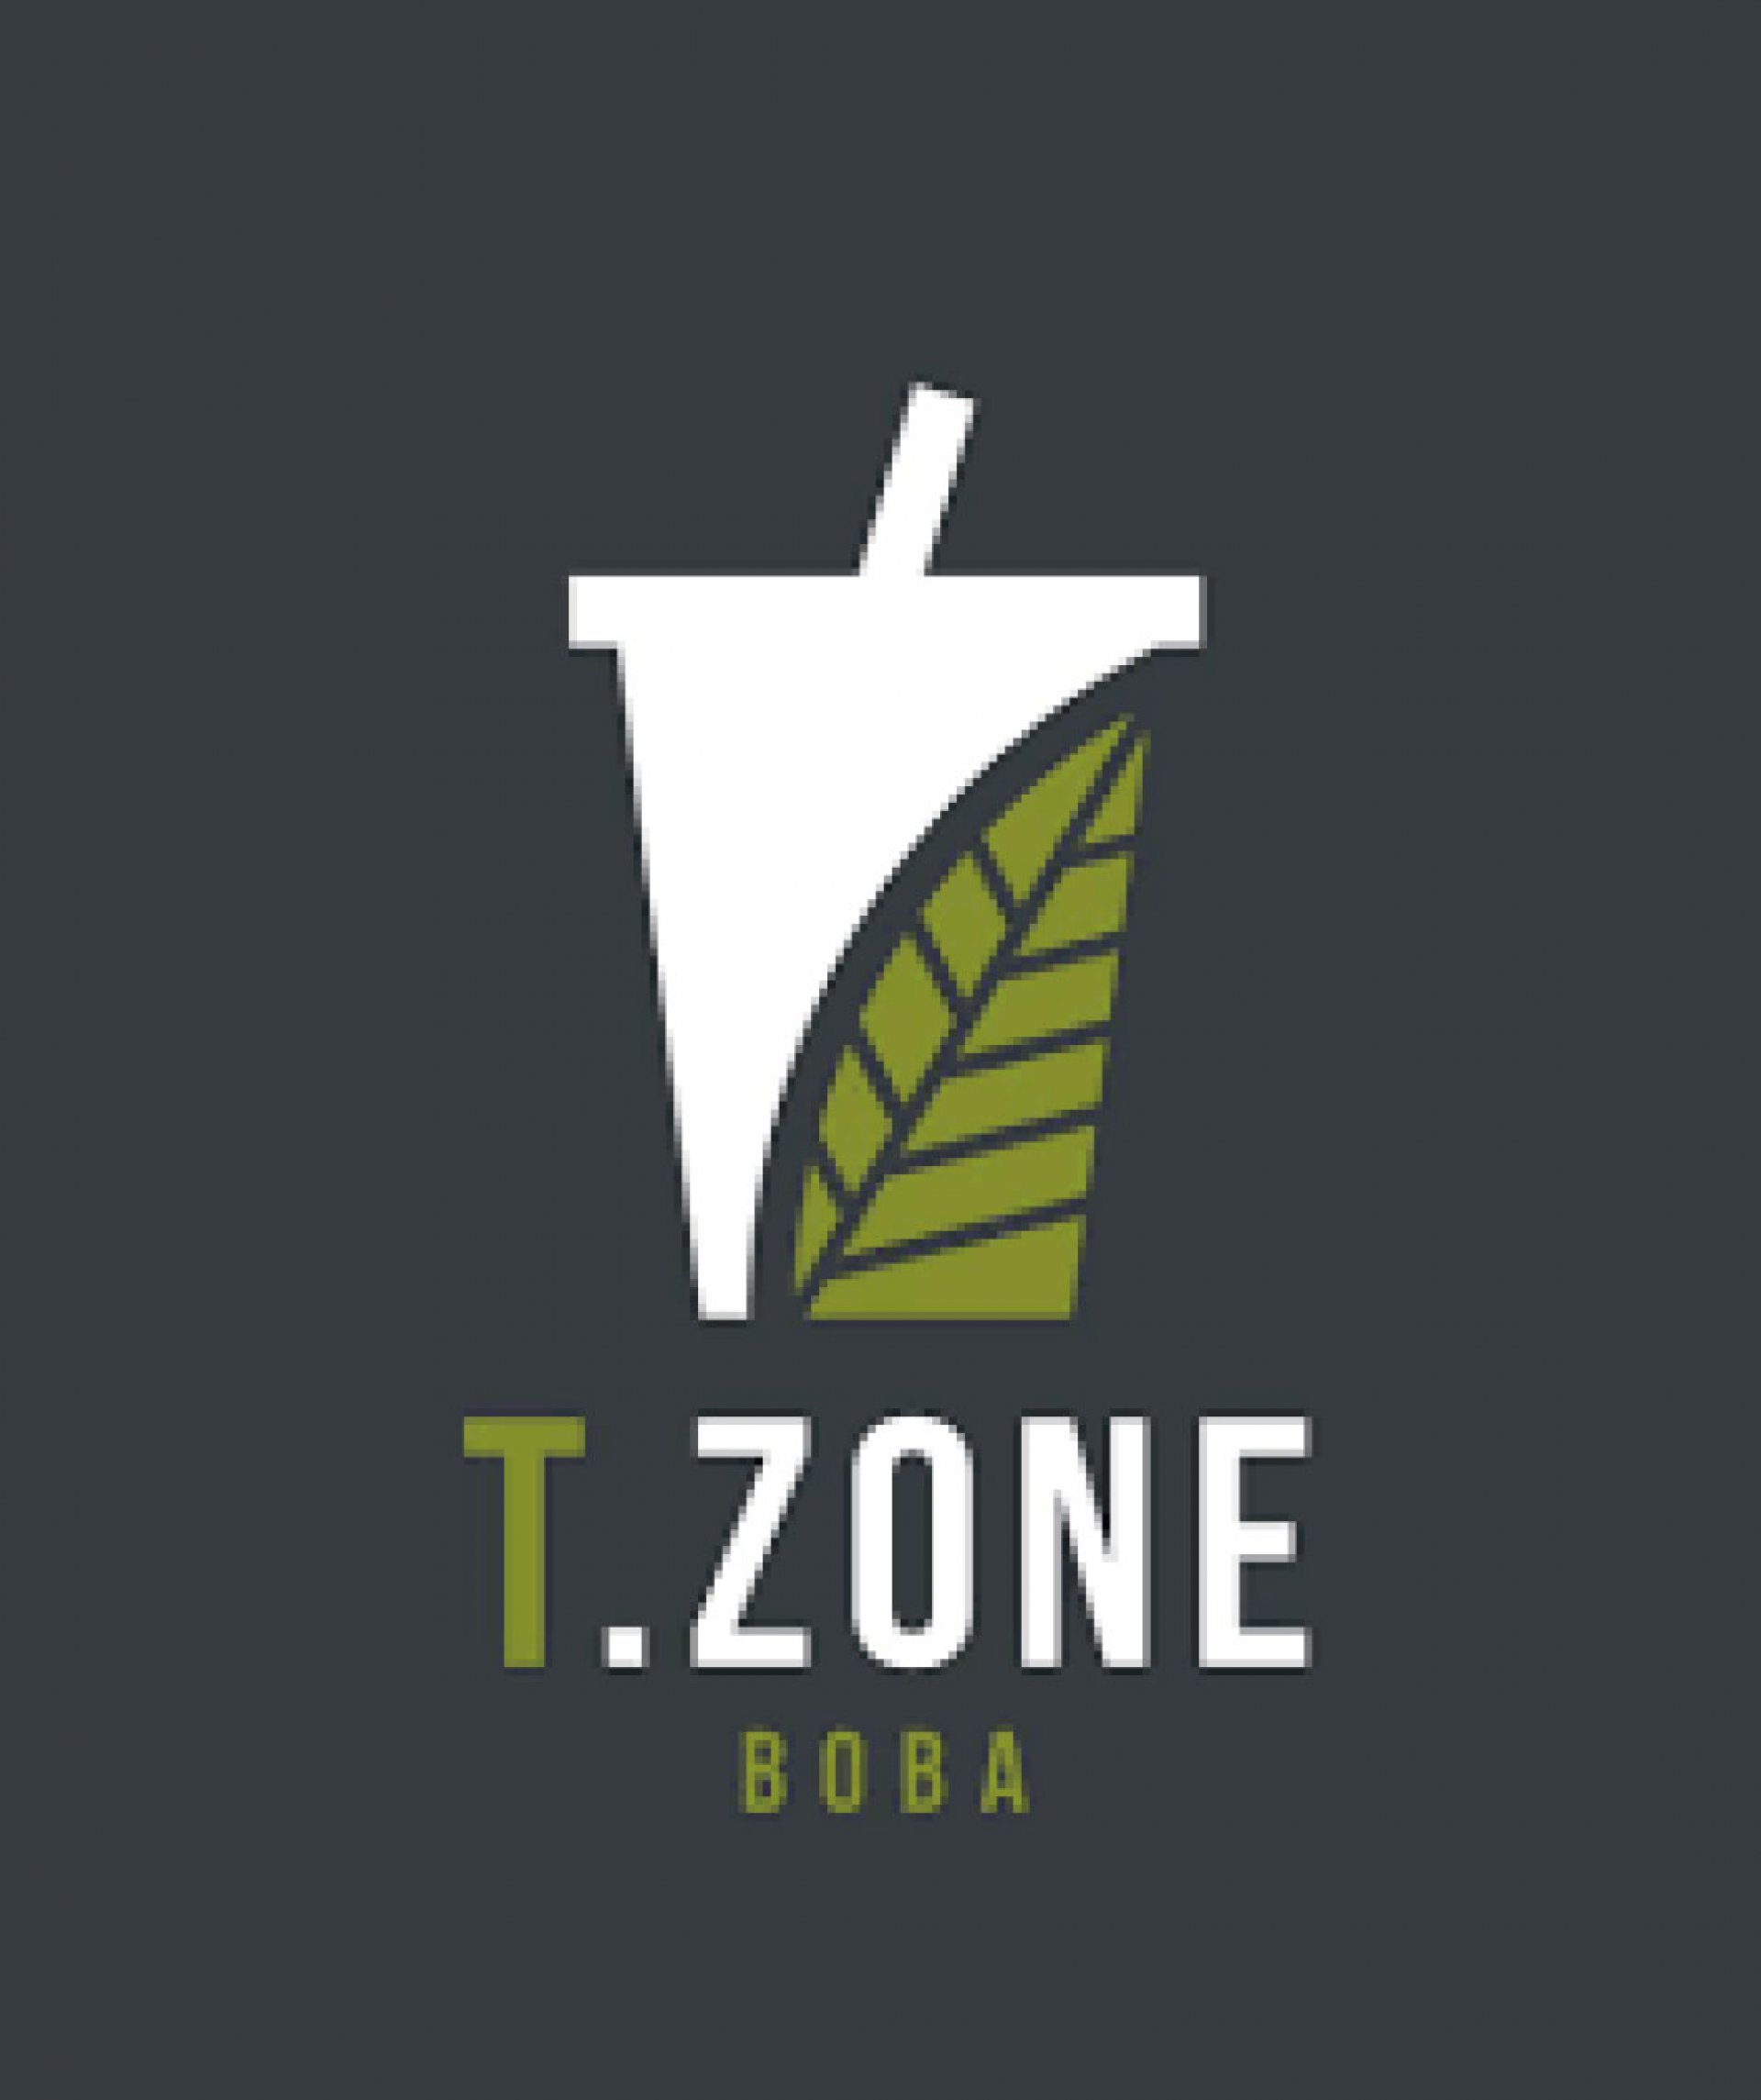 T.ZONE BOBA from Luxembourg